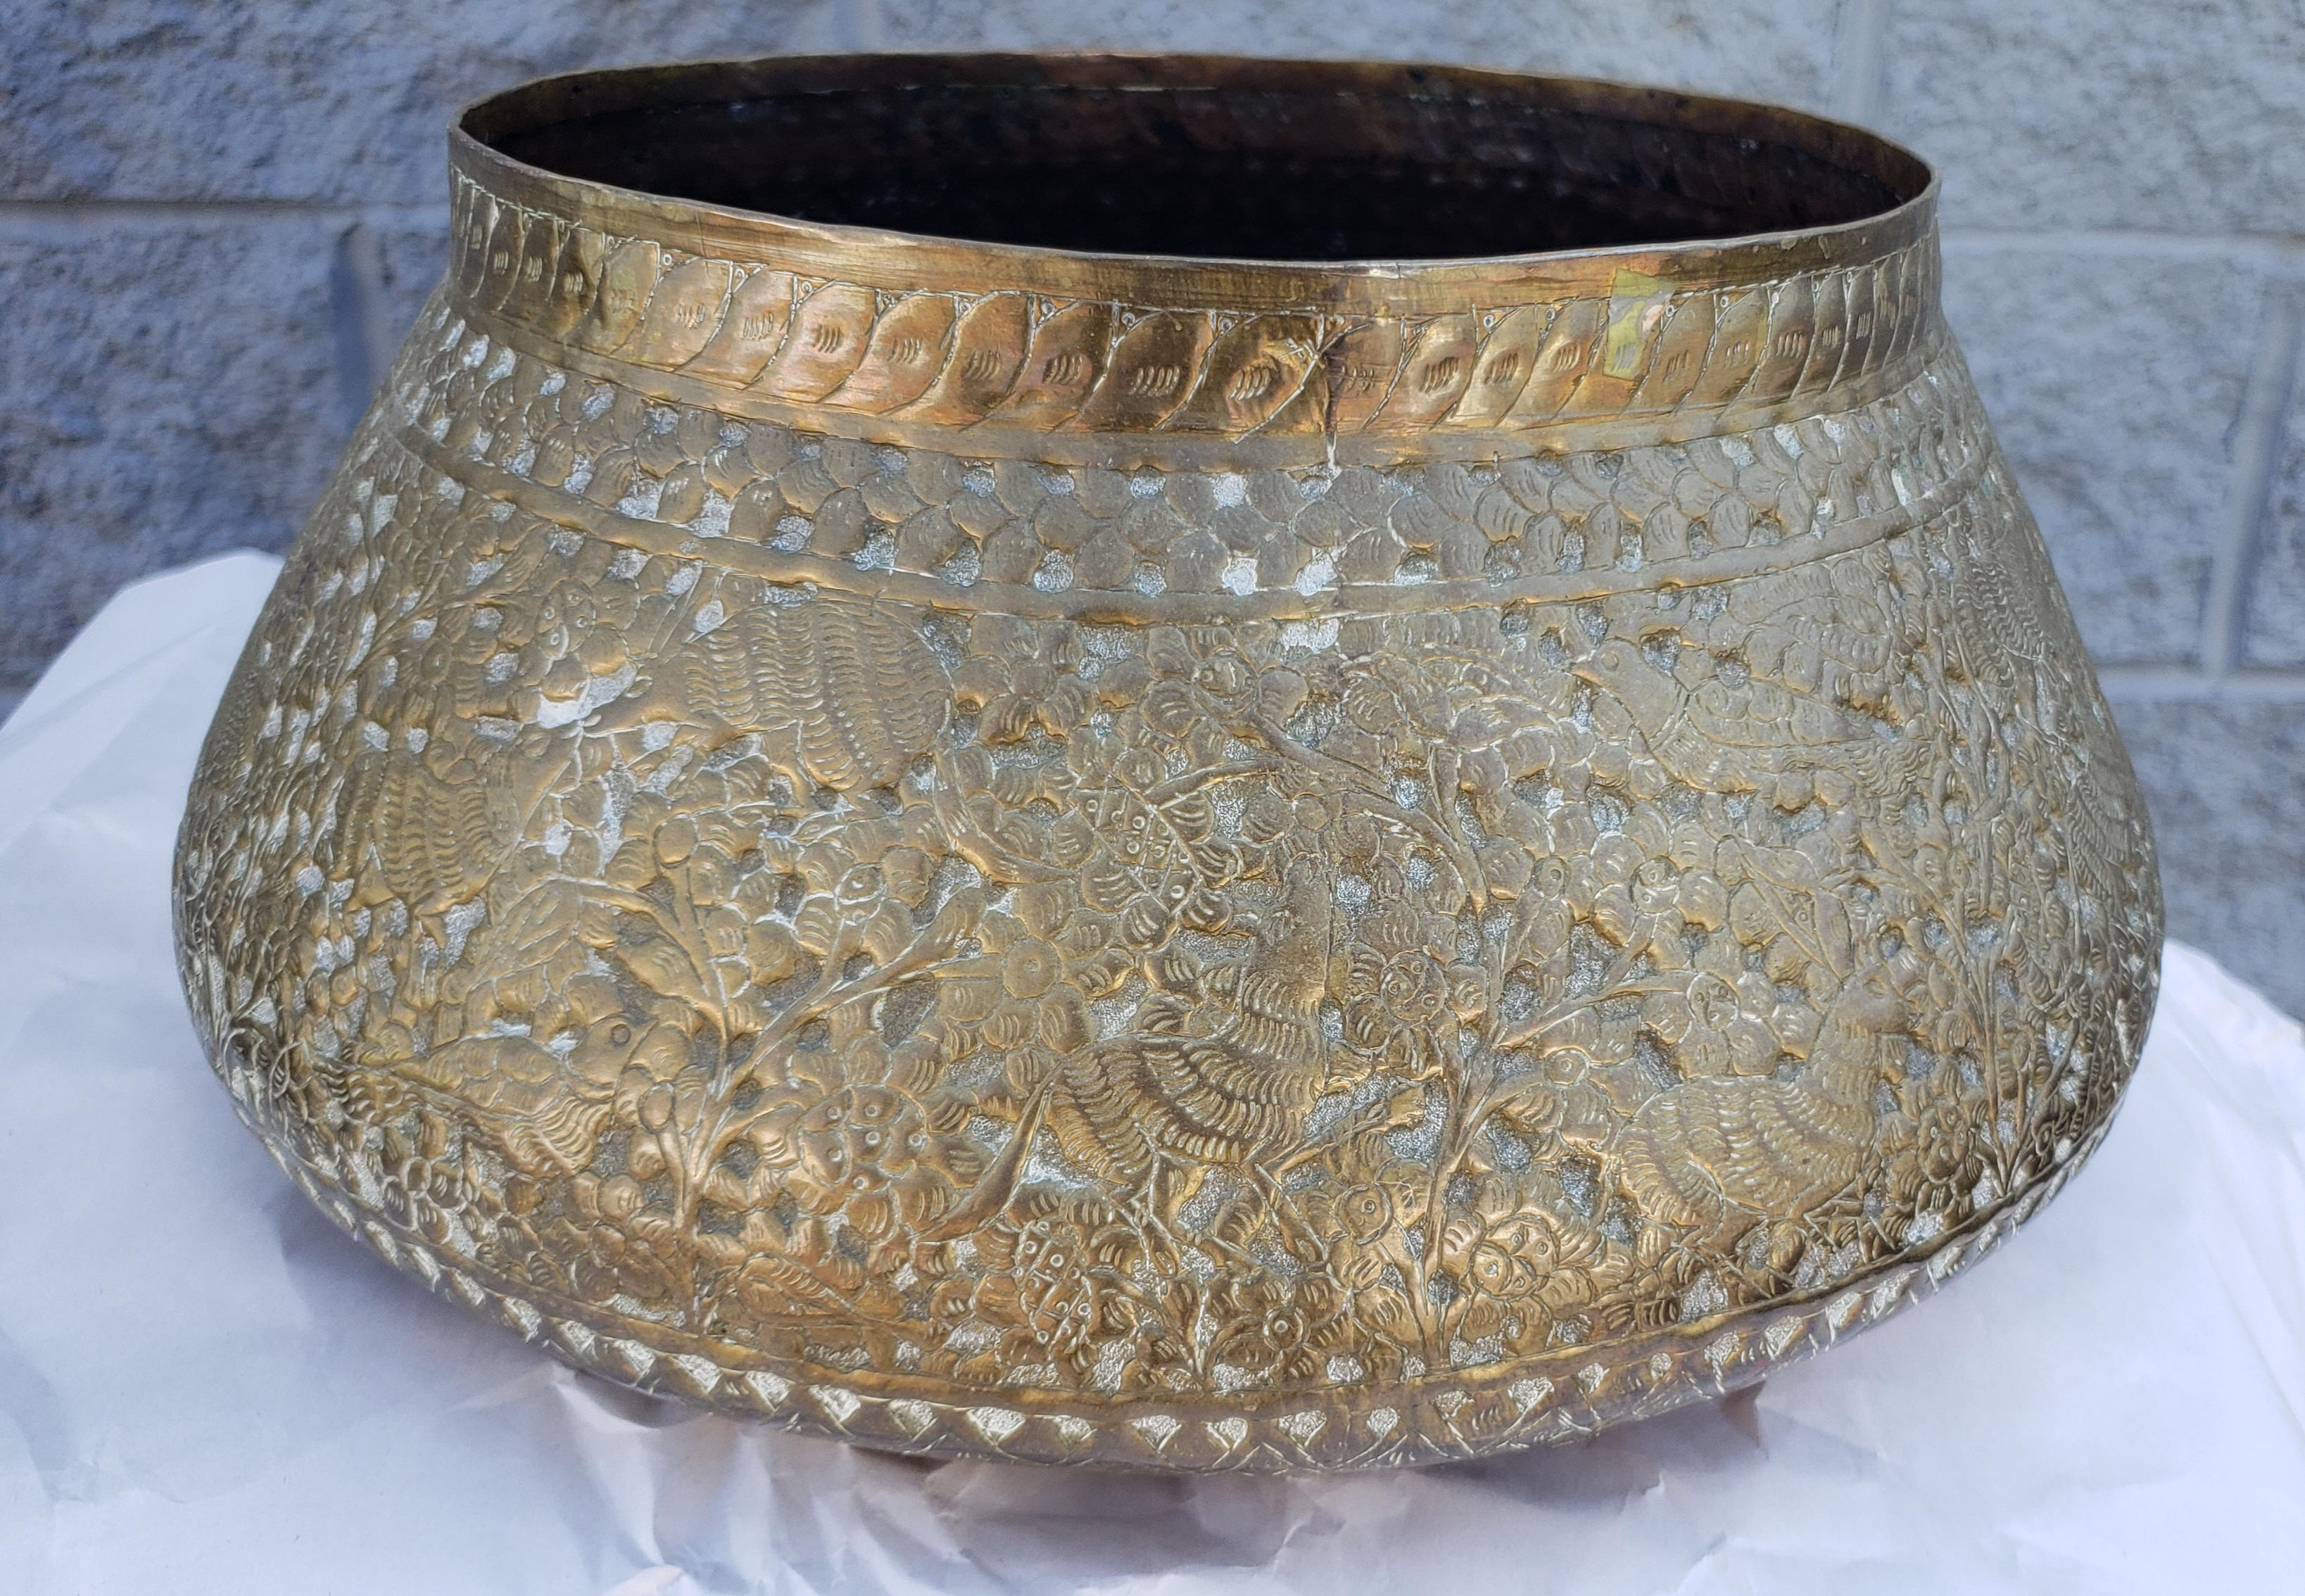 Indian Repoussé & Engraved Brass Bowl / Planter on Engraved Brass Stand / Stool For Sale 3